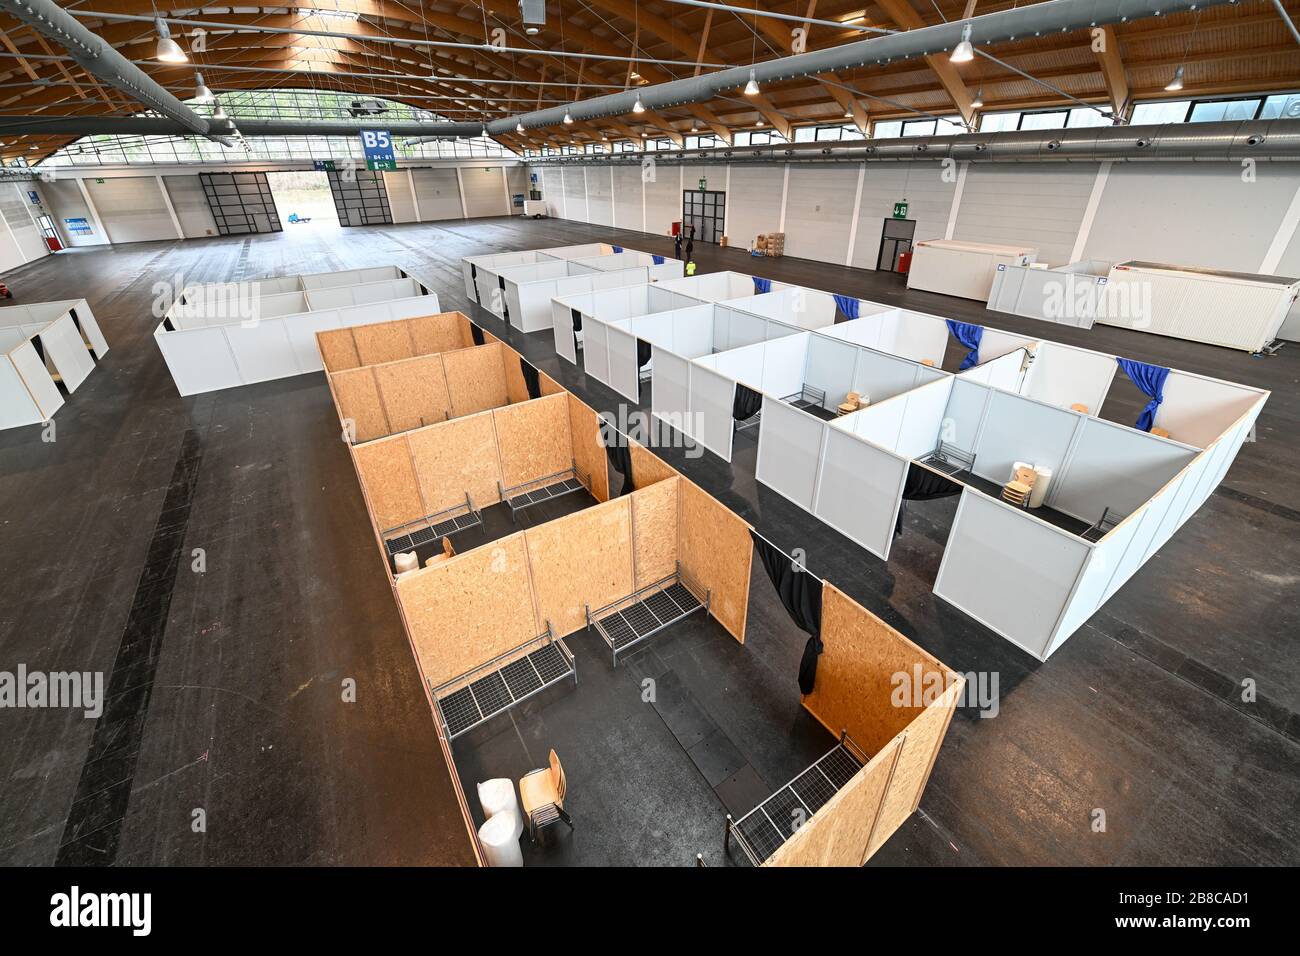 Ravensburg Germany 21st Mar 2020 Bedsteads Chairs And Mattresses Are Located In Various Cabins In One Of The Exhibition Halls The Lake Constance District Is Setting Up Emergency Accommodation In The Exhibition